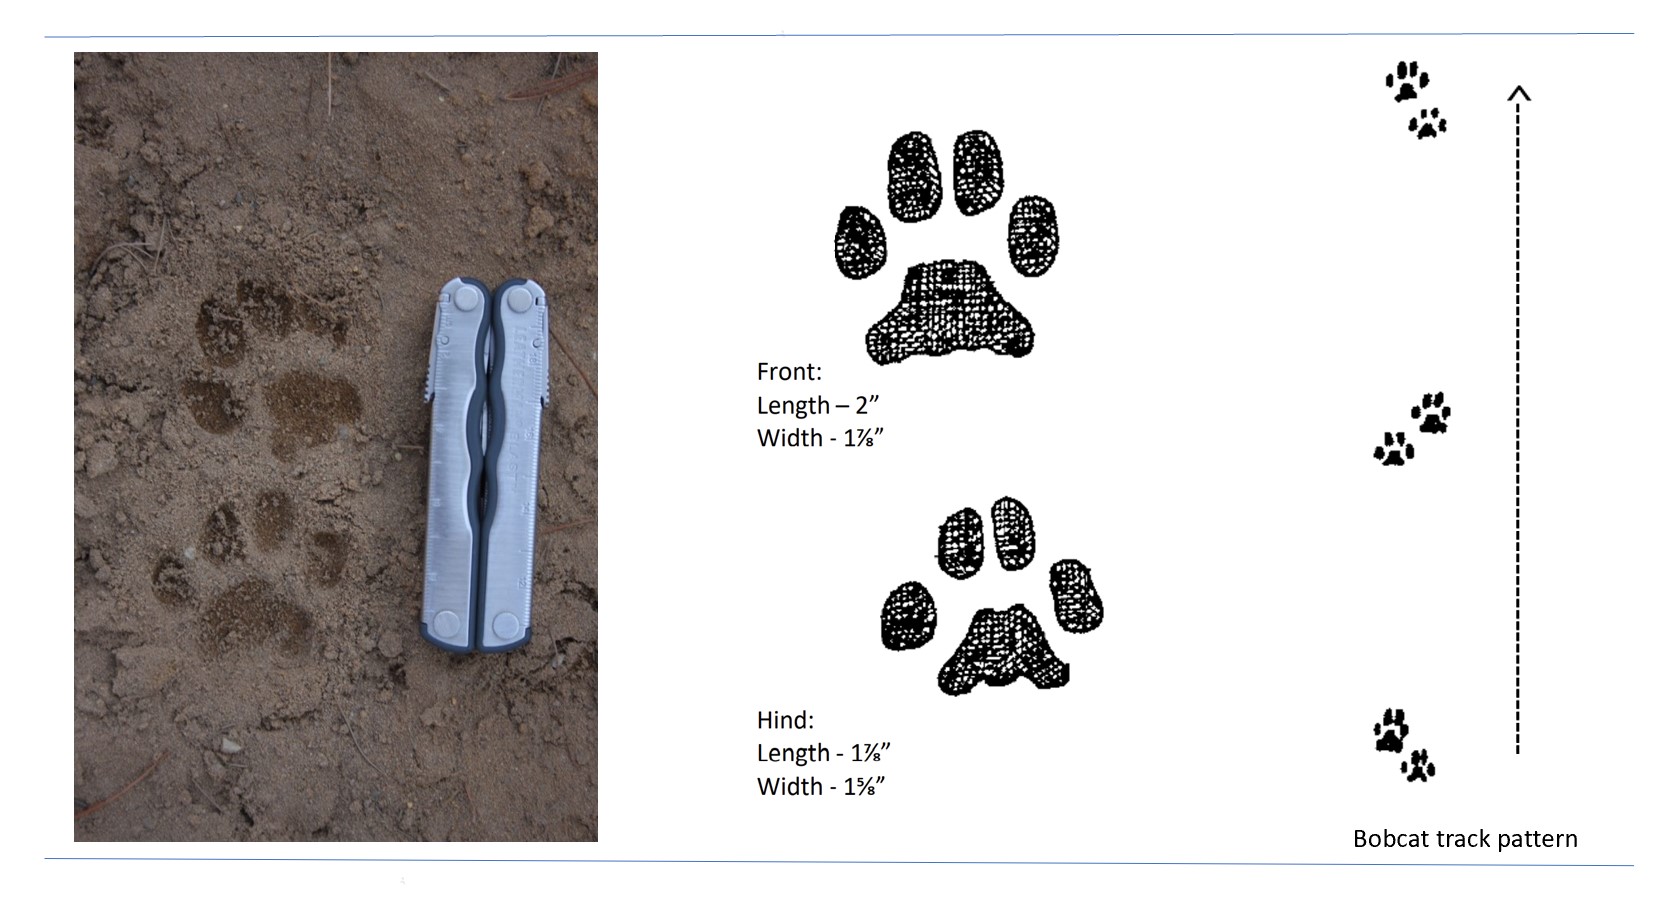 Photo and illustrated tracks of a bobcat.